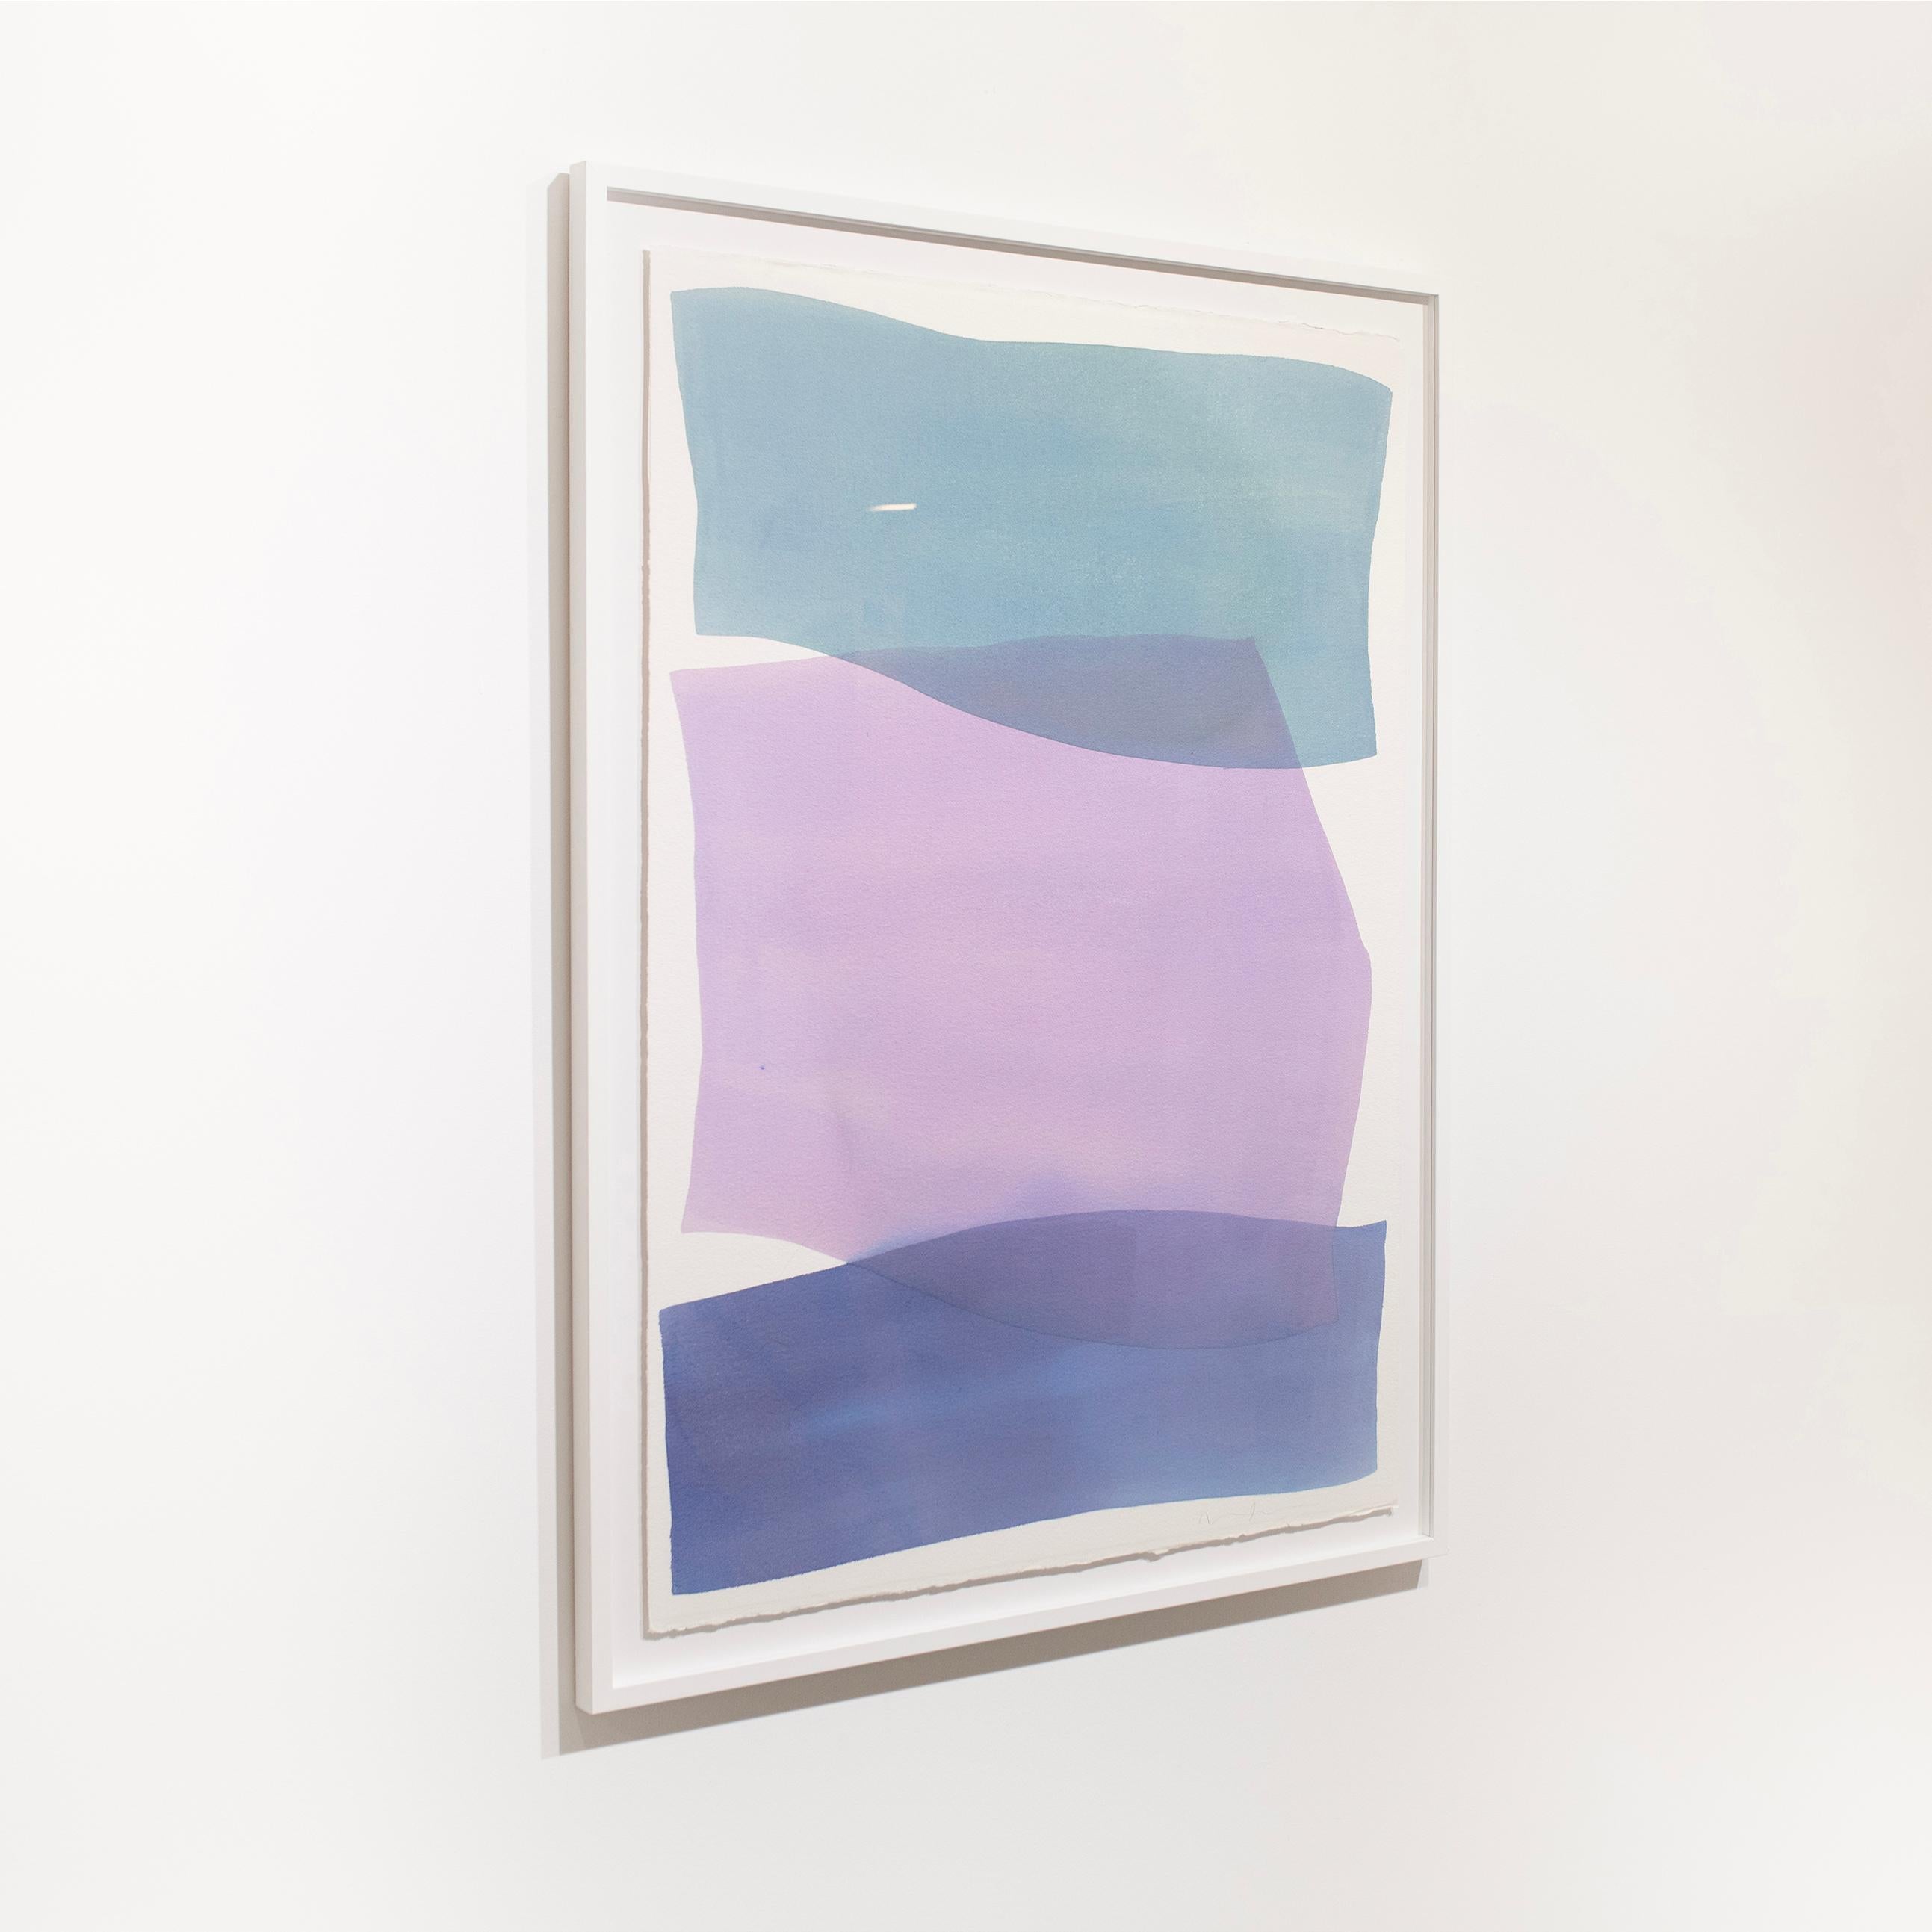 This original abstract watercolor painting by Nealy Hauschildt features a saturated blue, teal, and light violet palette. The artist layers three large organic planes of washy color over one another for a balanced abstract composition. The painting